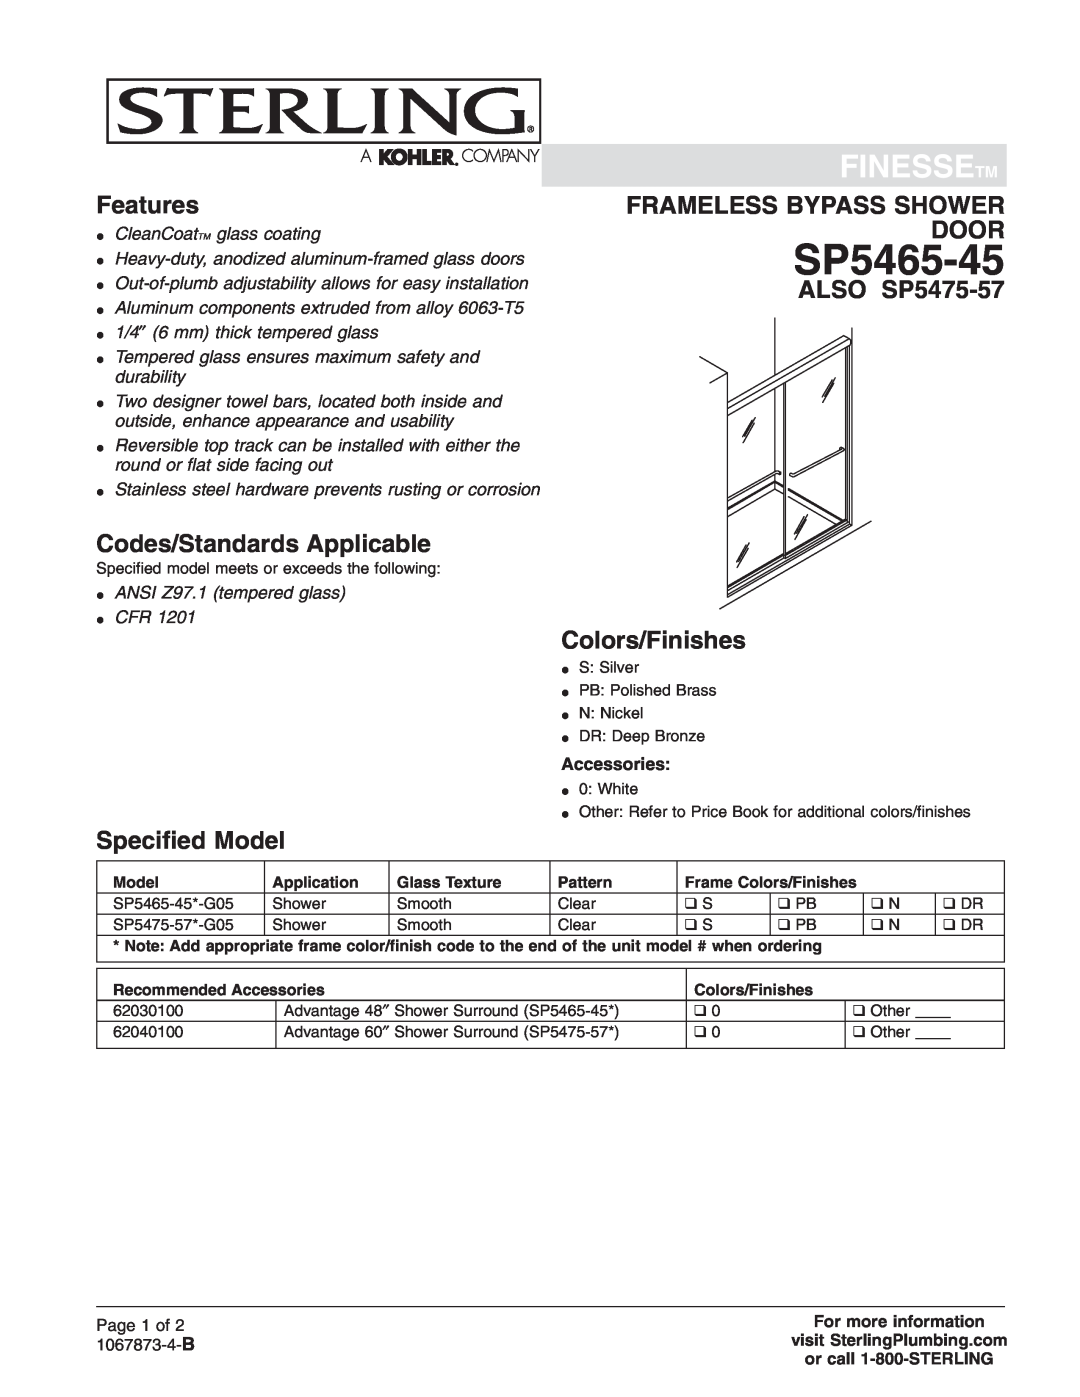 Sterling Plumbing SP5465-45 manual Finessetm, Features, Codes/Standards Applicable, Speciﬁed Model, Accessories, Page 1 of 